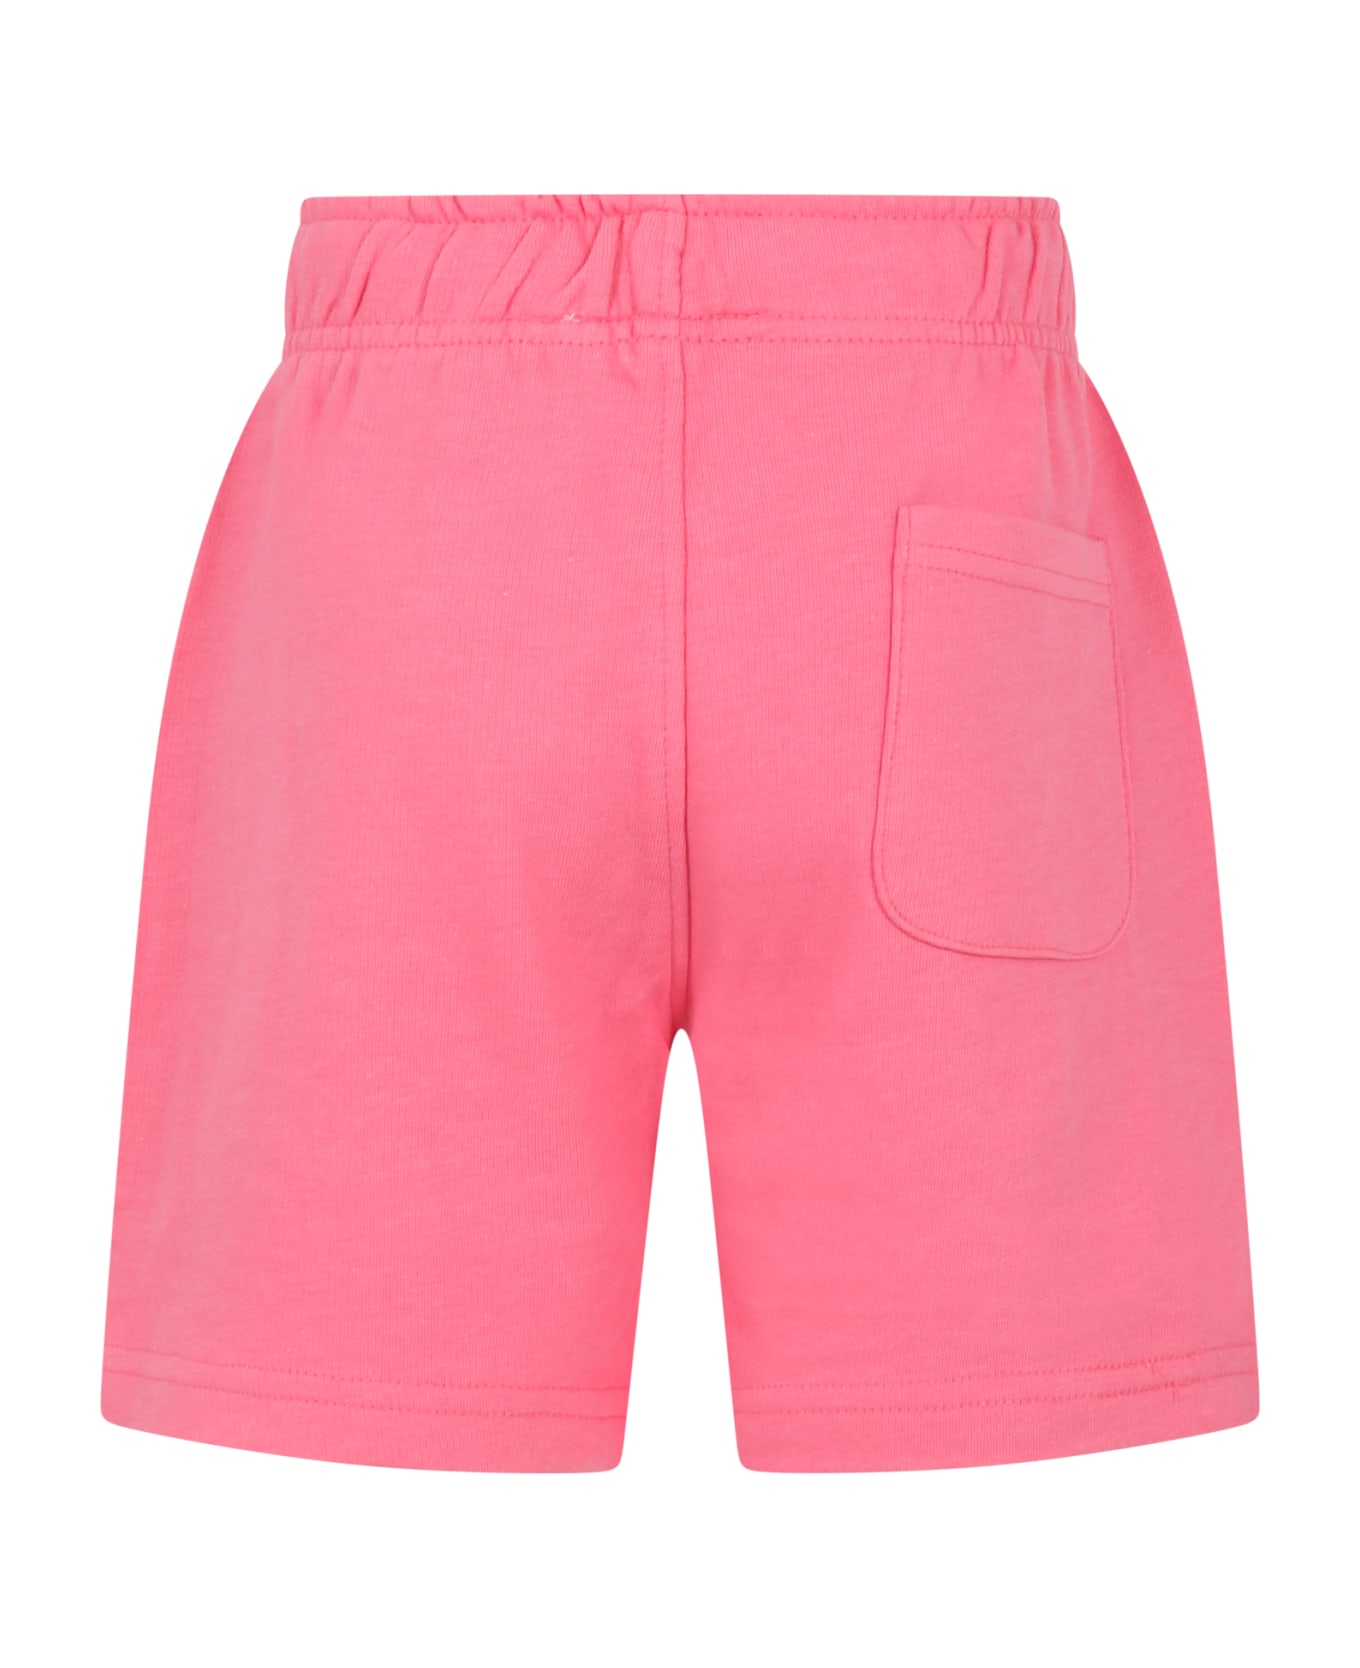 Molo Pink Shorts For Girl With Peace Symbol - Pink